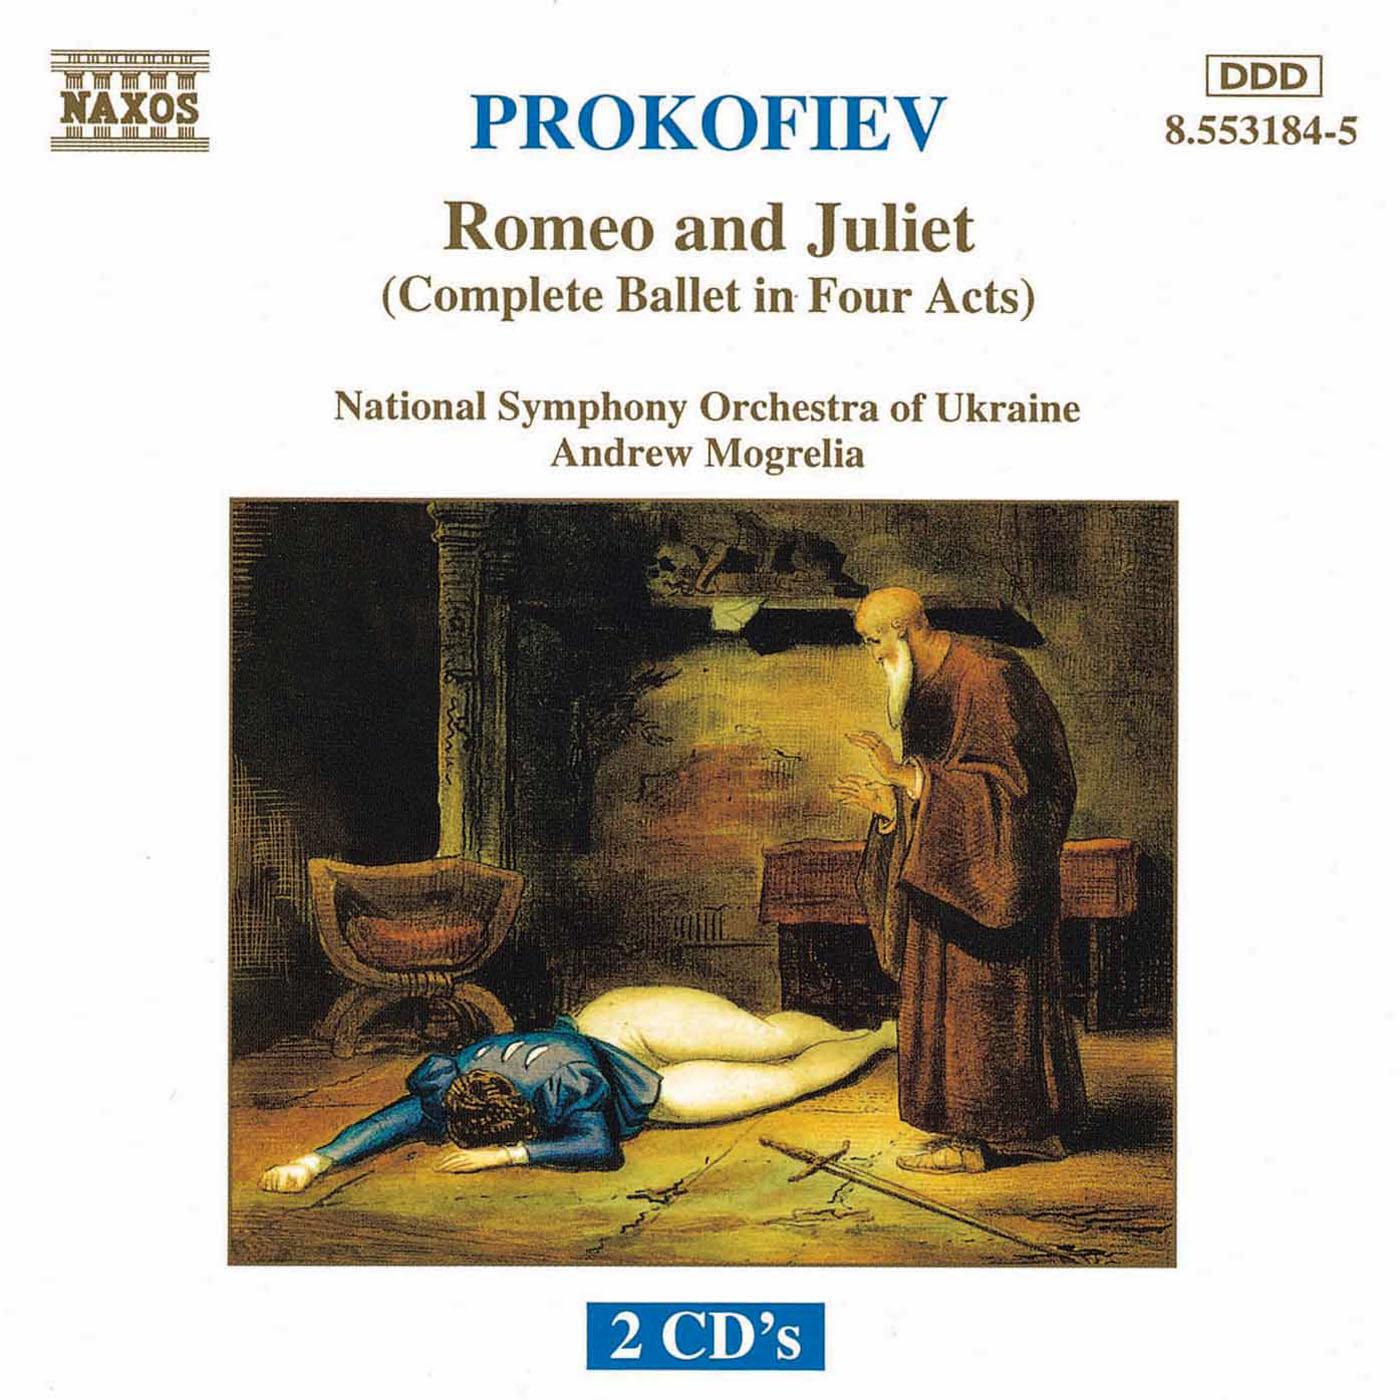 64 act. Romeo and Juliet op. 64. Prokofiev - Romeo and Juliet (Andre Previn). Prokofiev Gergiev Romeo and Juliet CD. Prokofiev: Romeo and Juliet, op. 64, Act 1, Scene 2: no. 13, Dance of the Knights.